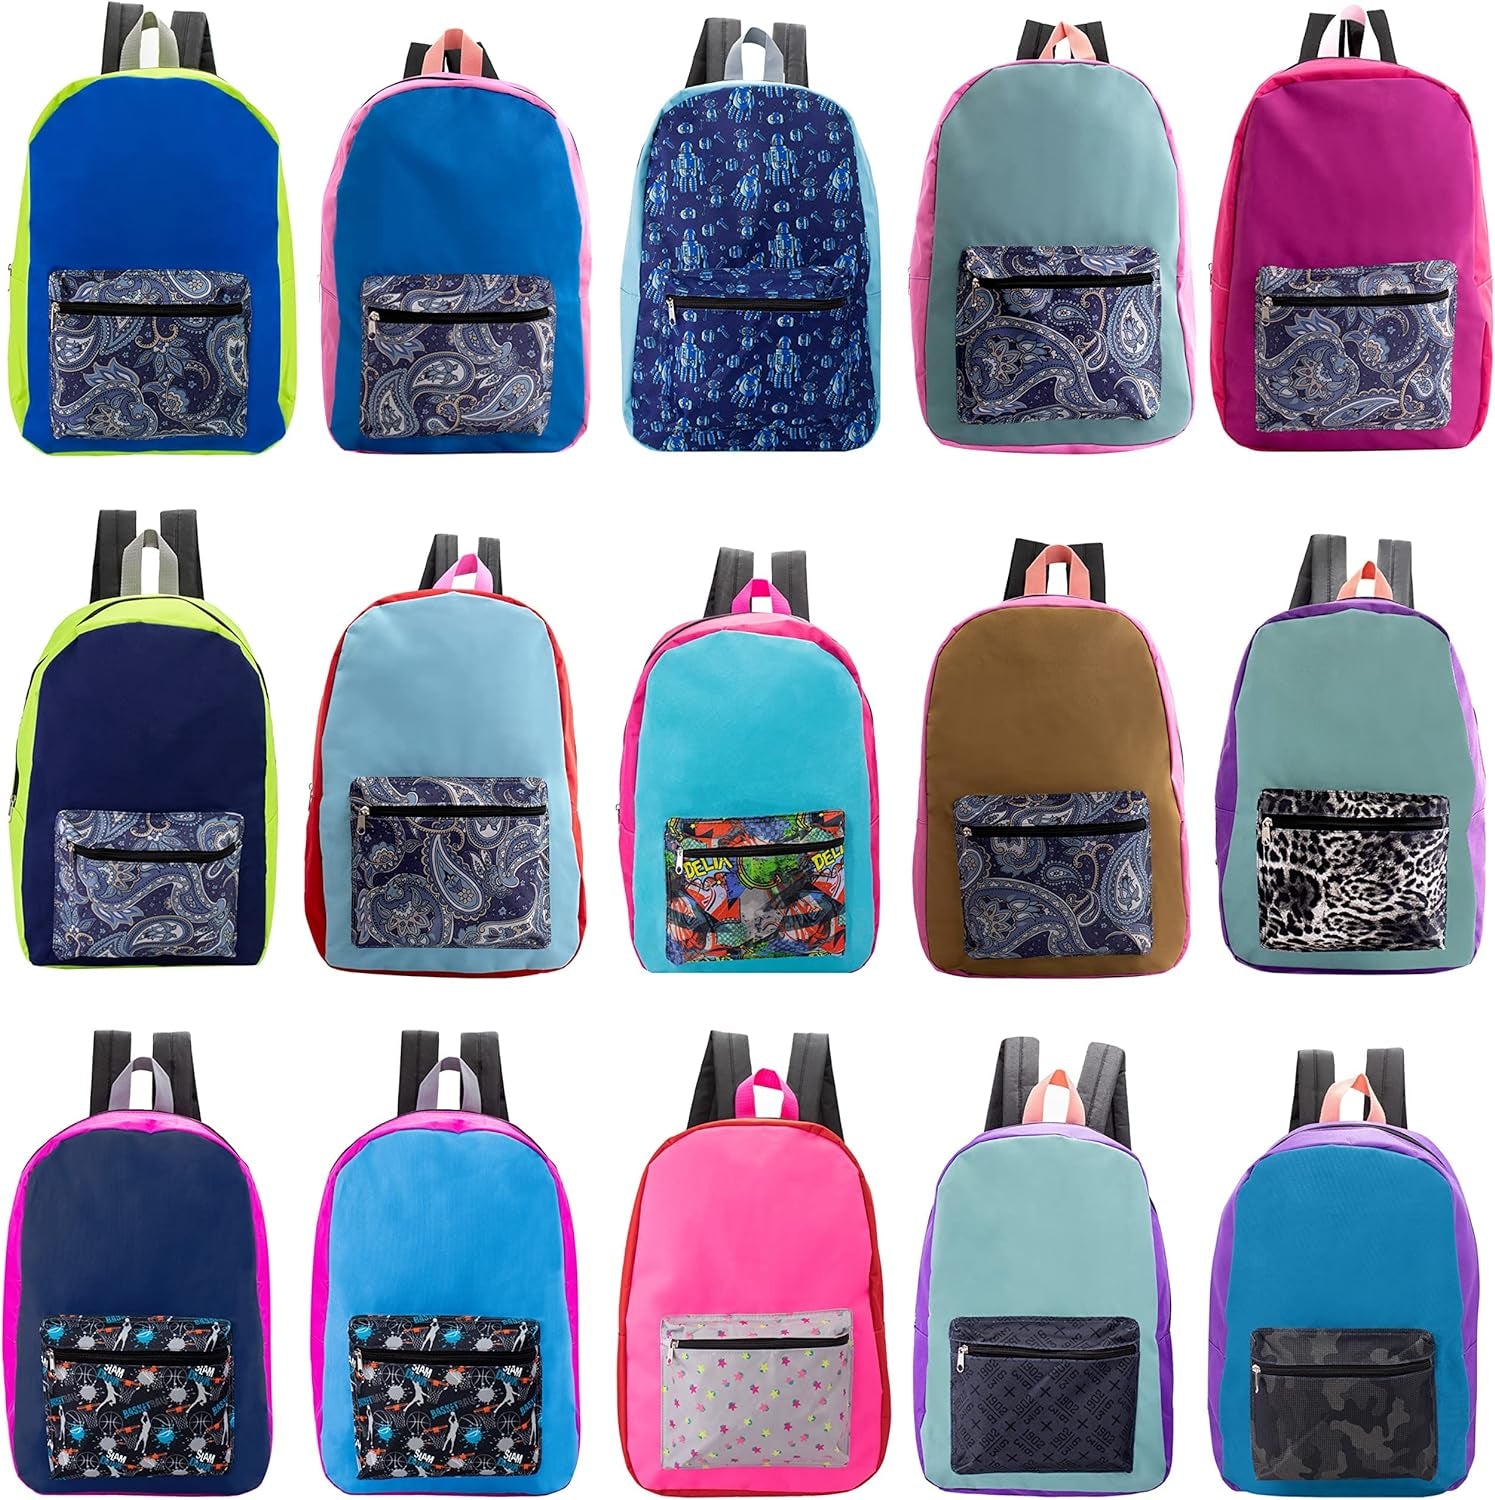 24-Pack 17" School Backpacks for Kids - Backpacks in Bulk for Elementary, Middle, and High School Students, 12 Assorted Colors